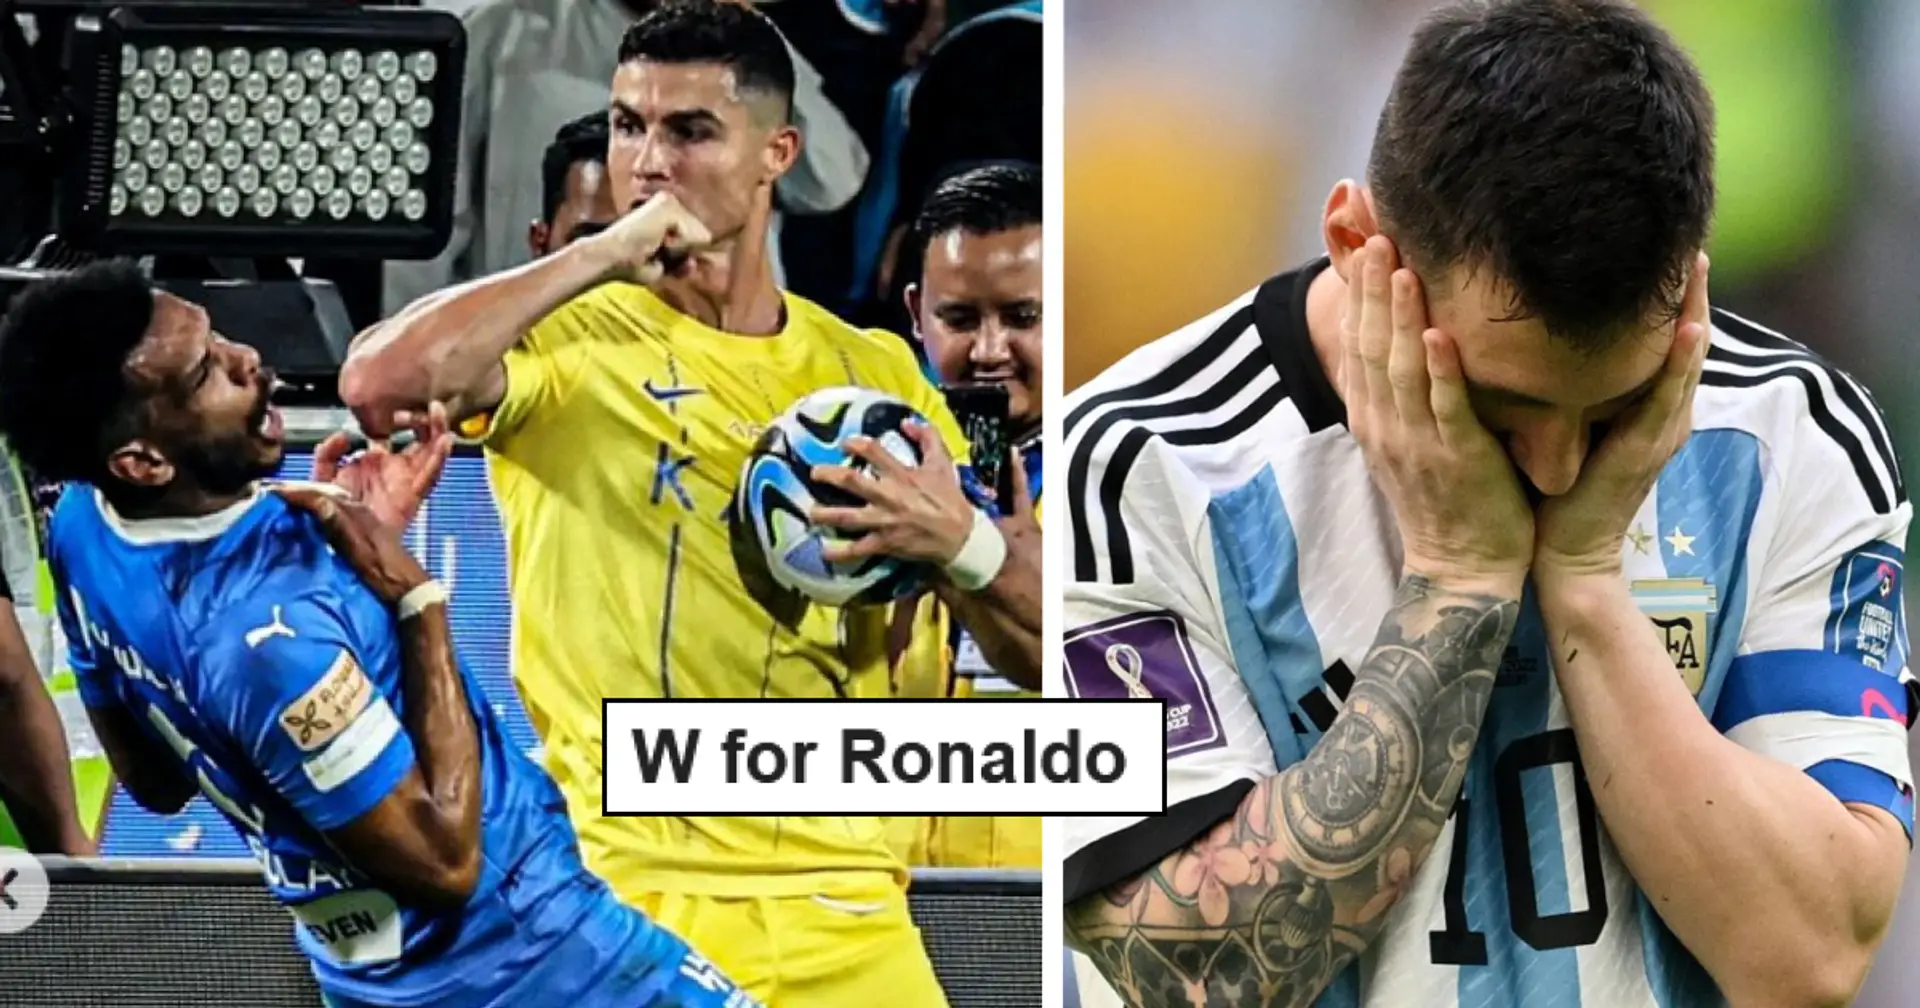 Why Messi fans are supporting Ronaldo for elbowing Saudi player and getting straight red